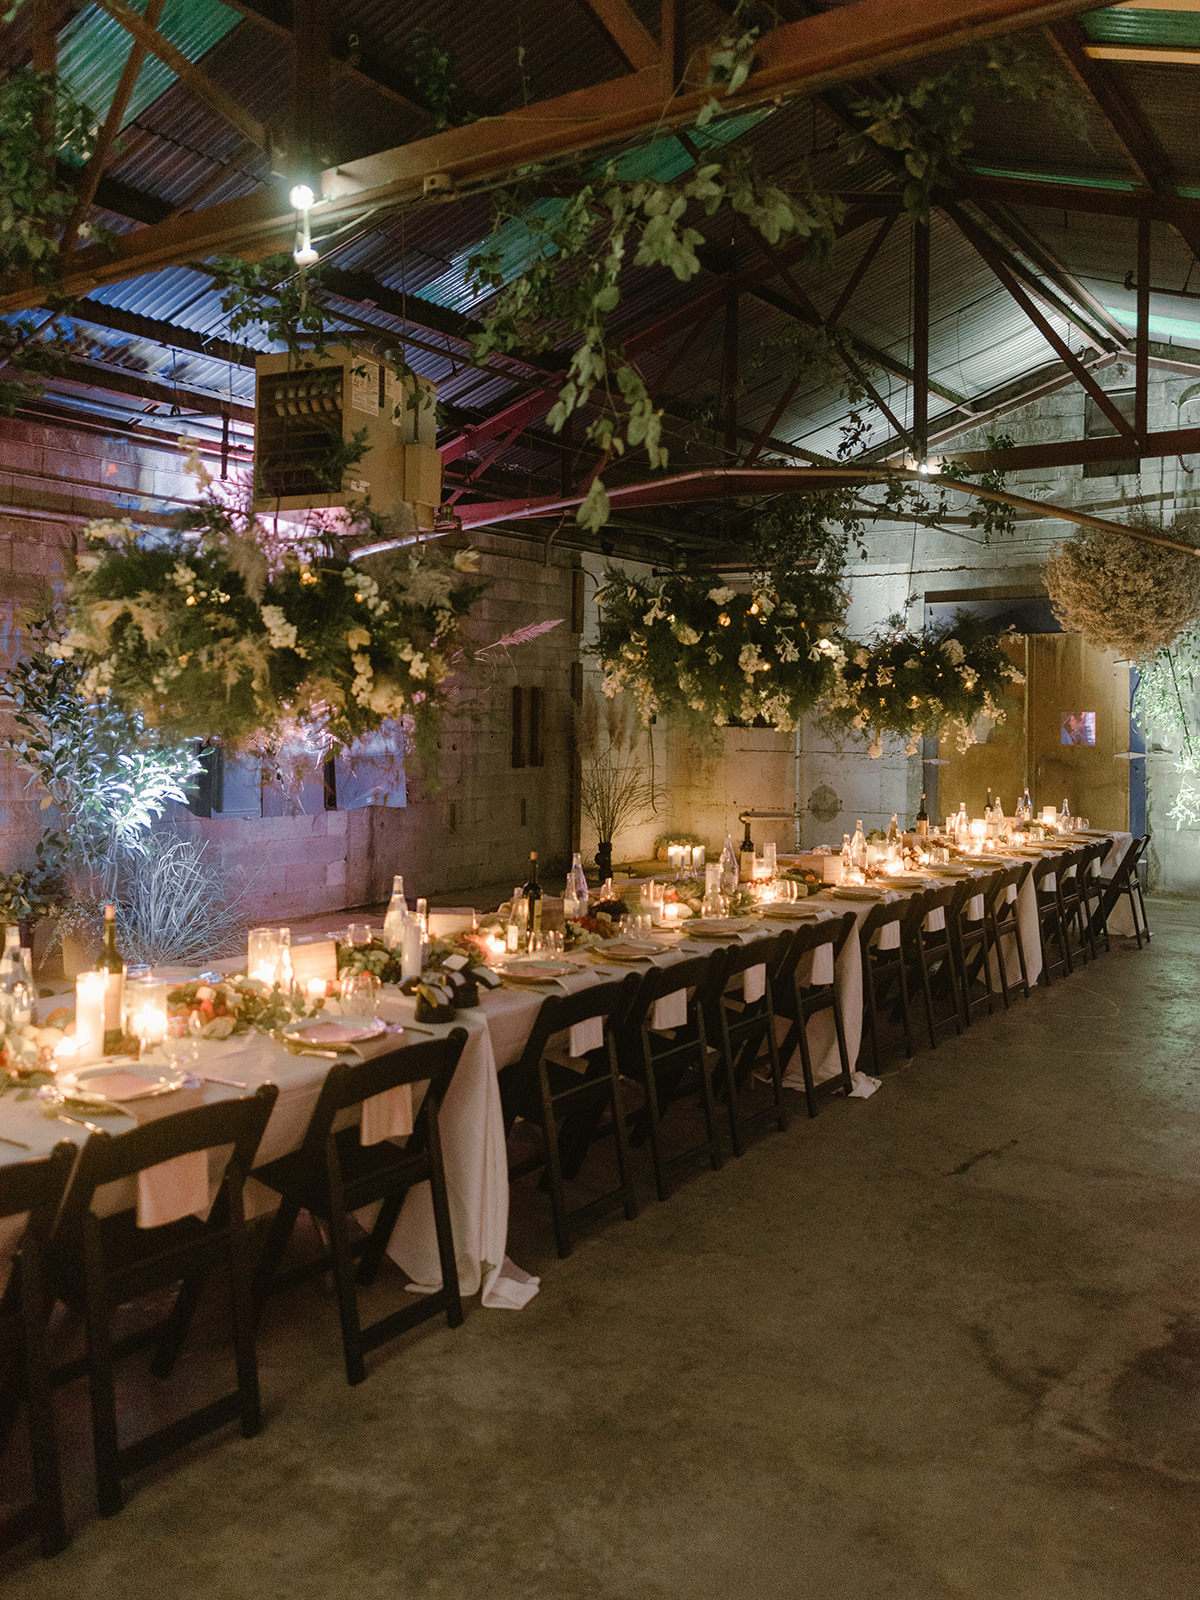 An abundant floral installation ran the length of the warehouse and included trees provided by the Barn Nursery